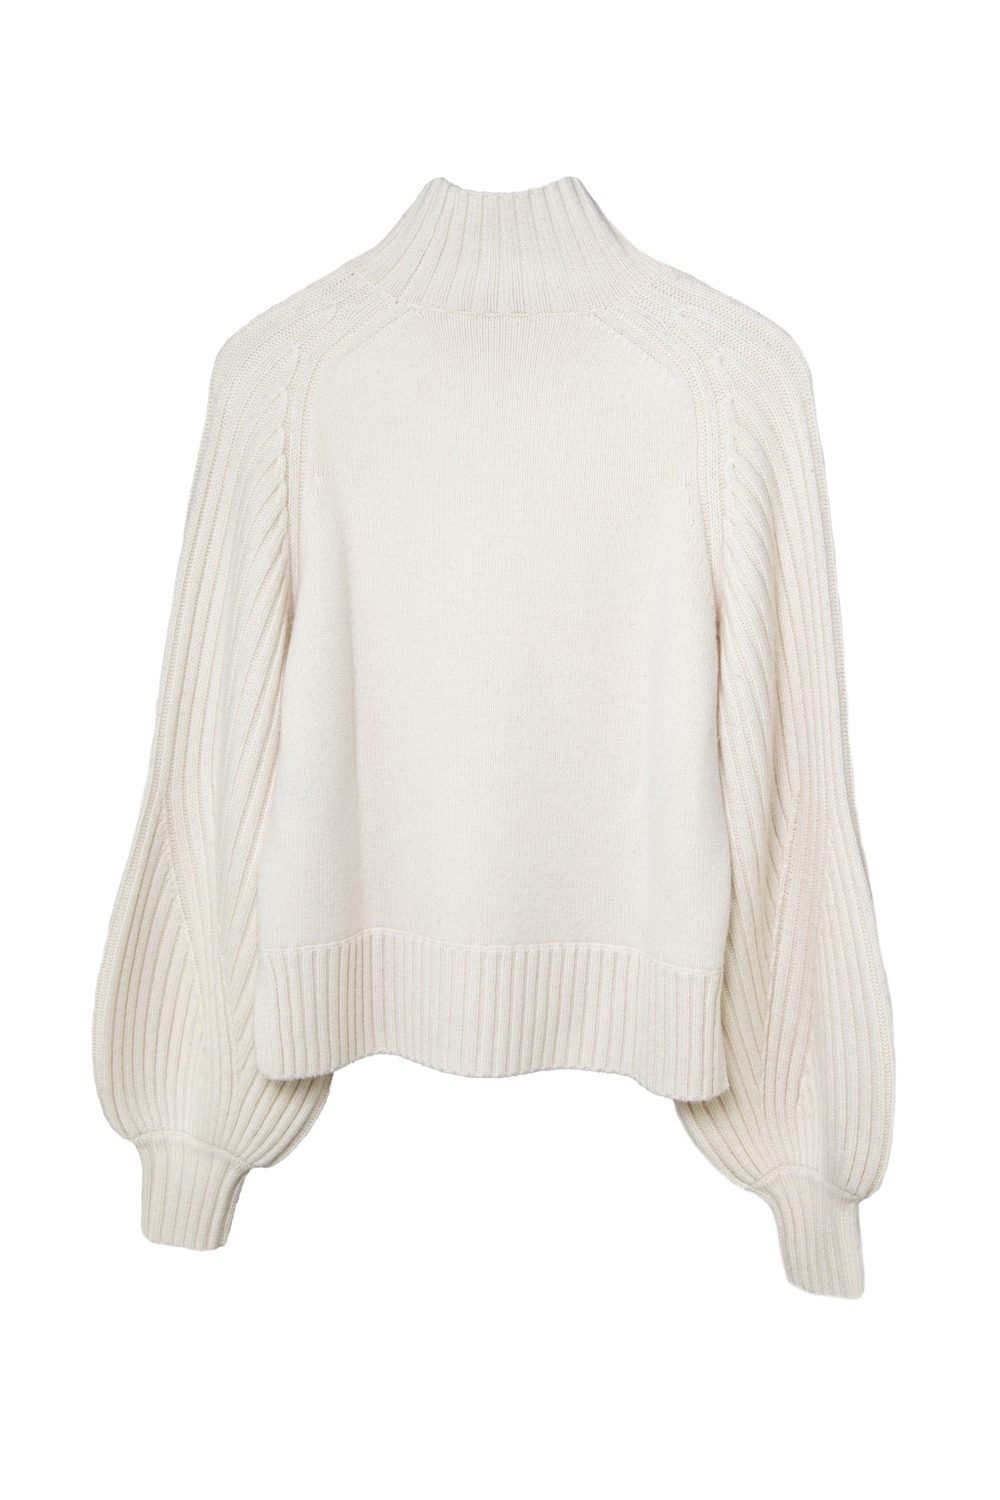 Thumbnail of http://Zimmermann%20Strickpullover%20in%20Cremeweiß